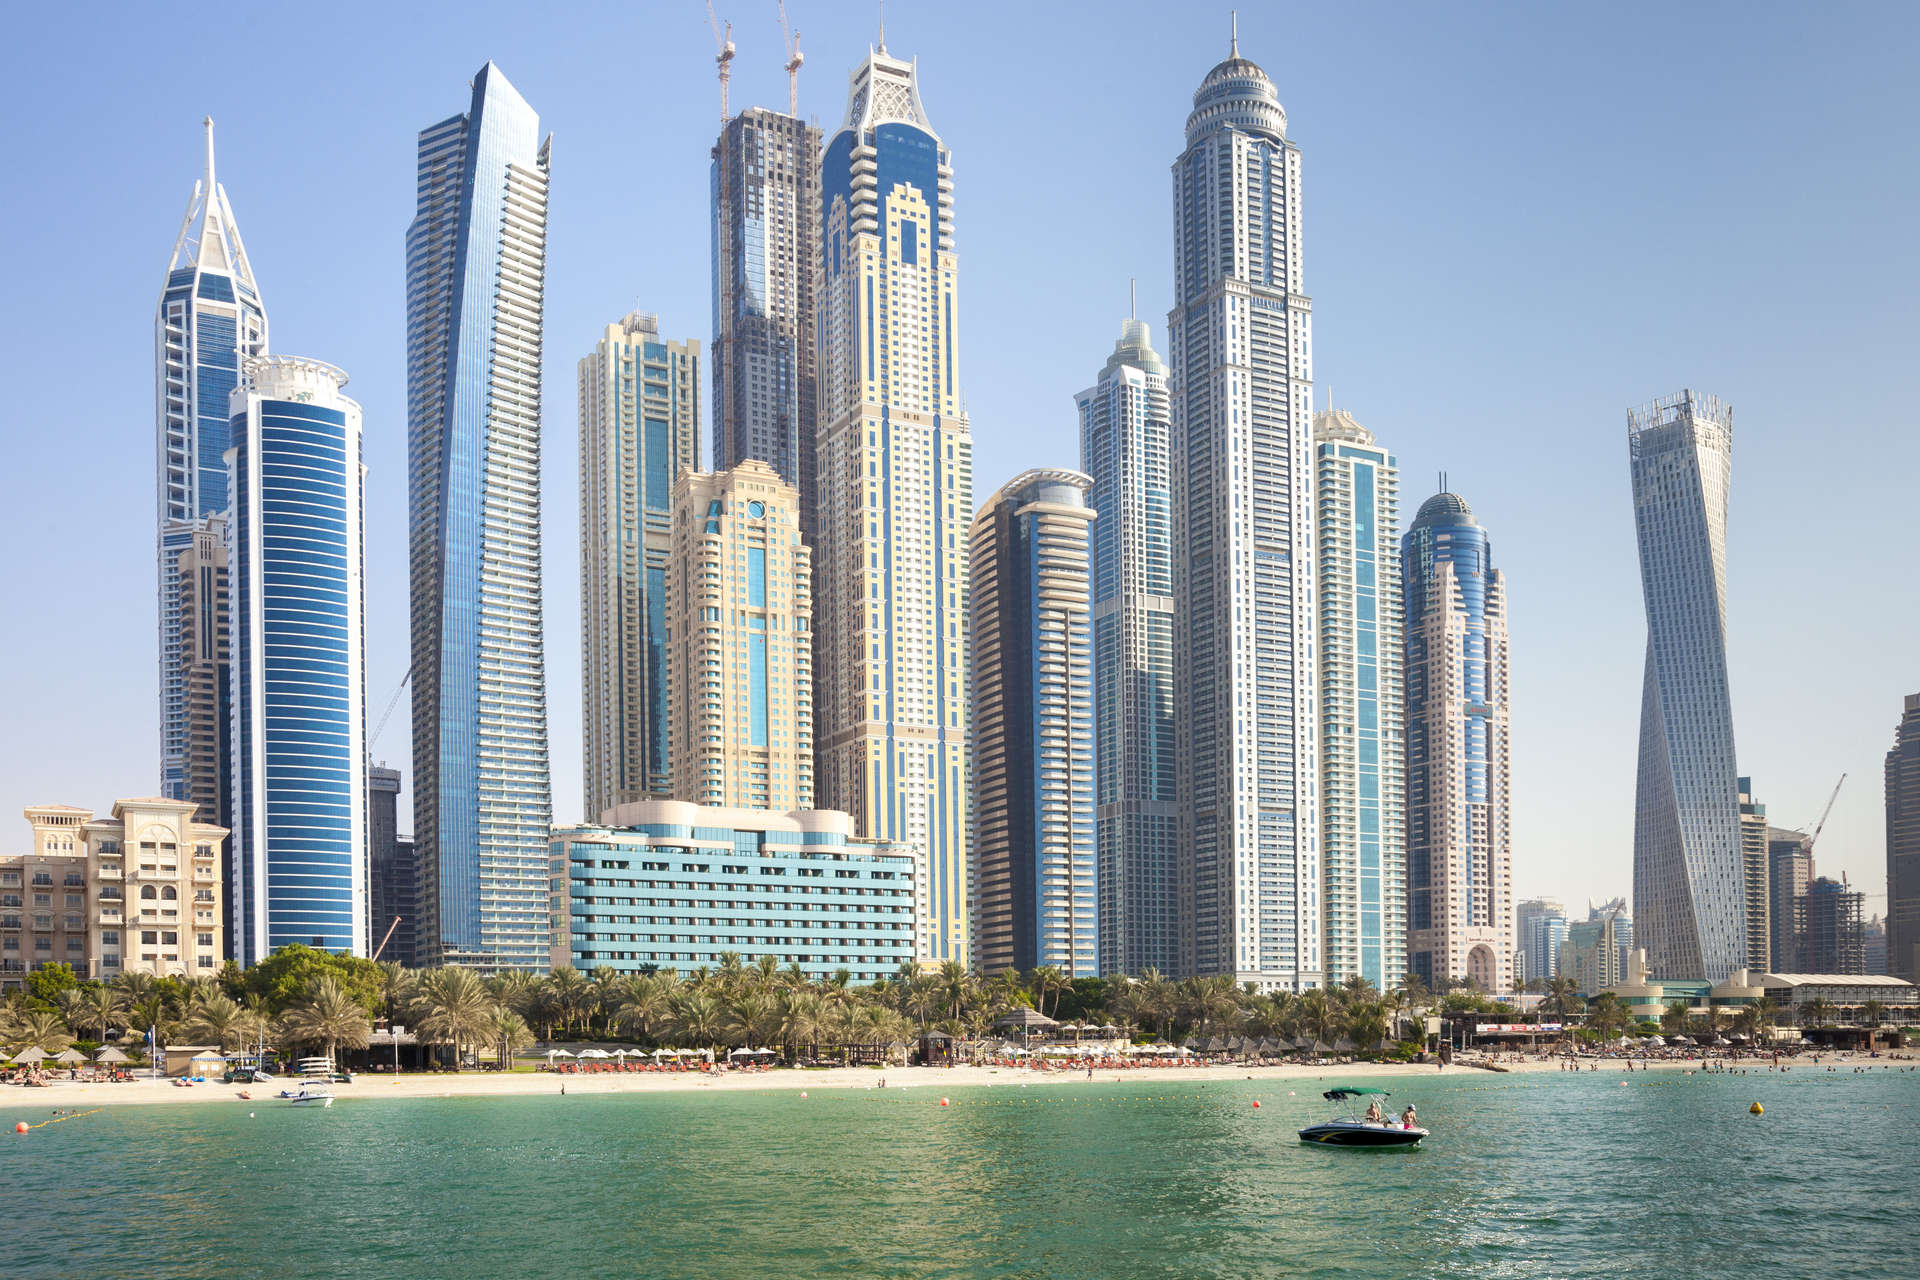 High rise buildings in the JBR